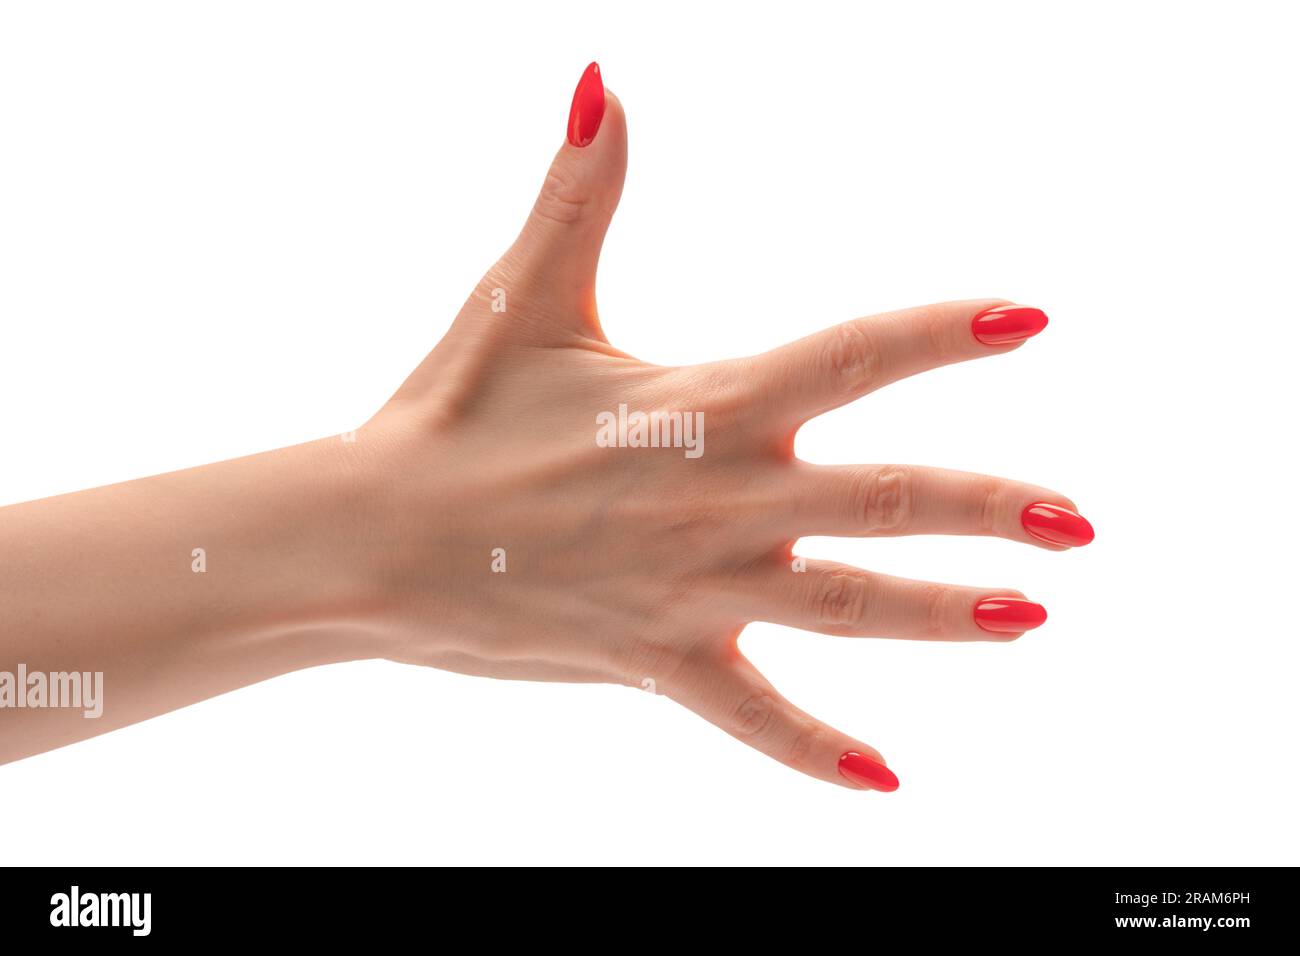 Closeup of female hand with pale skin and red nails pointing or touching isolated on a white background. Stock Photo